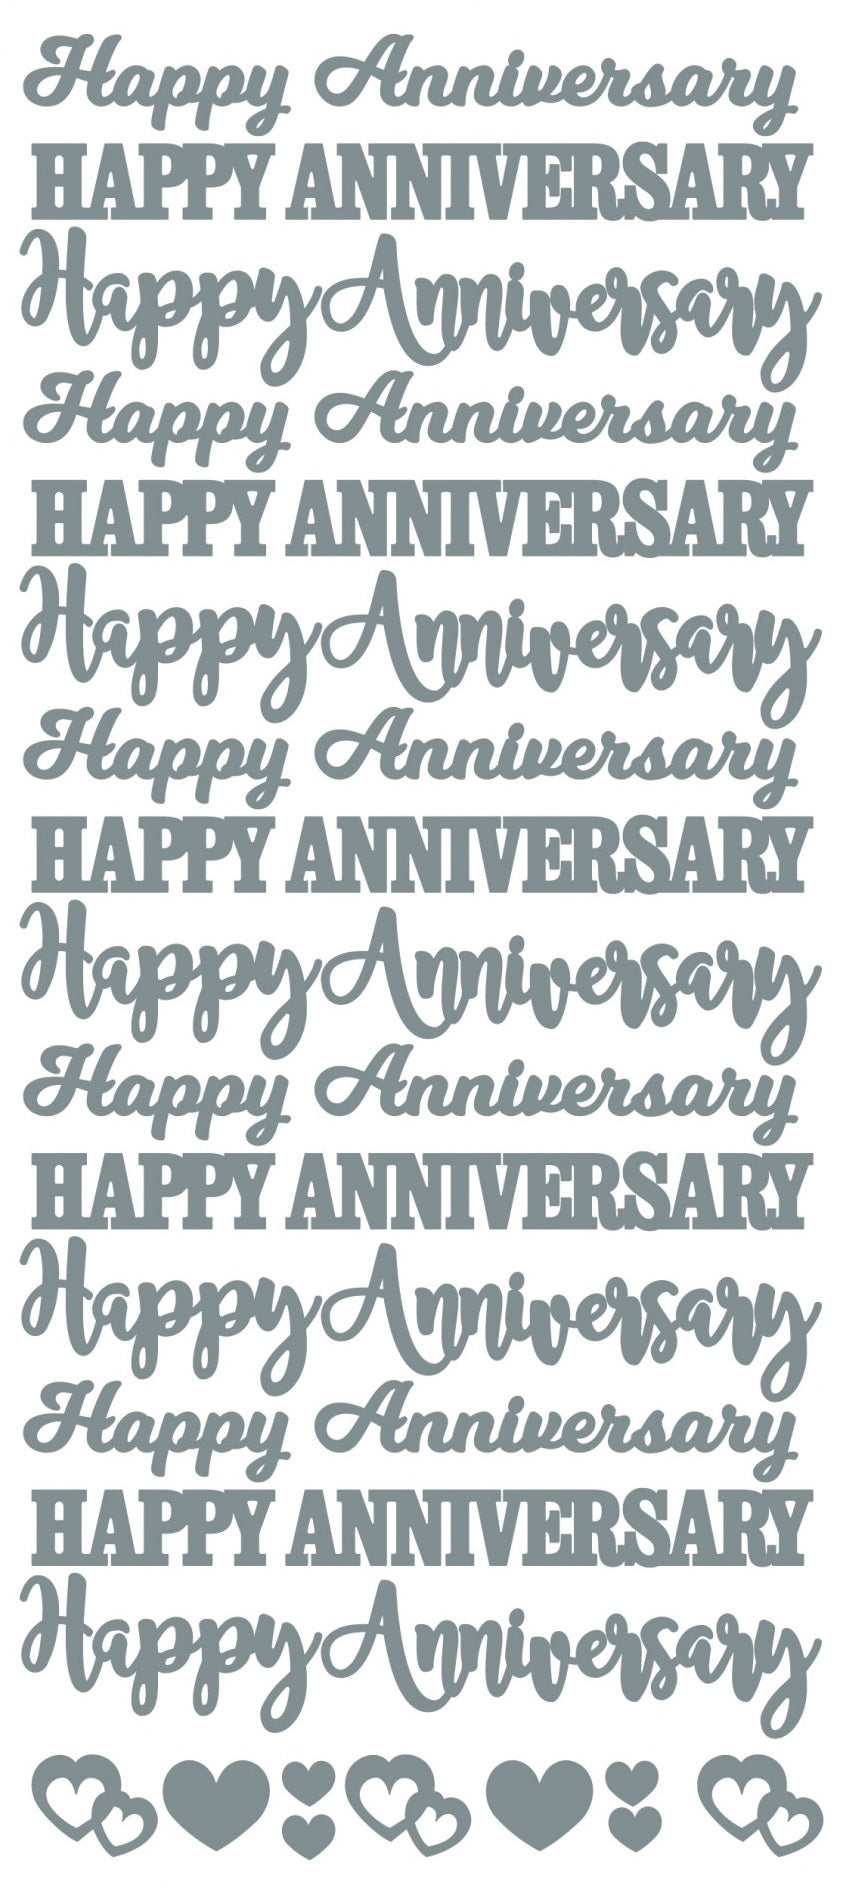 Happy Anniversary 3 fonts Outline Sticker  4745